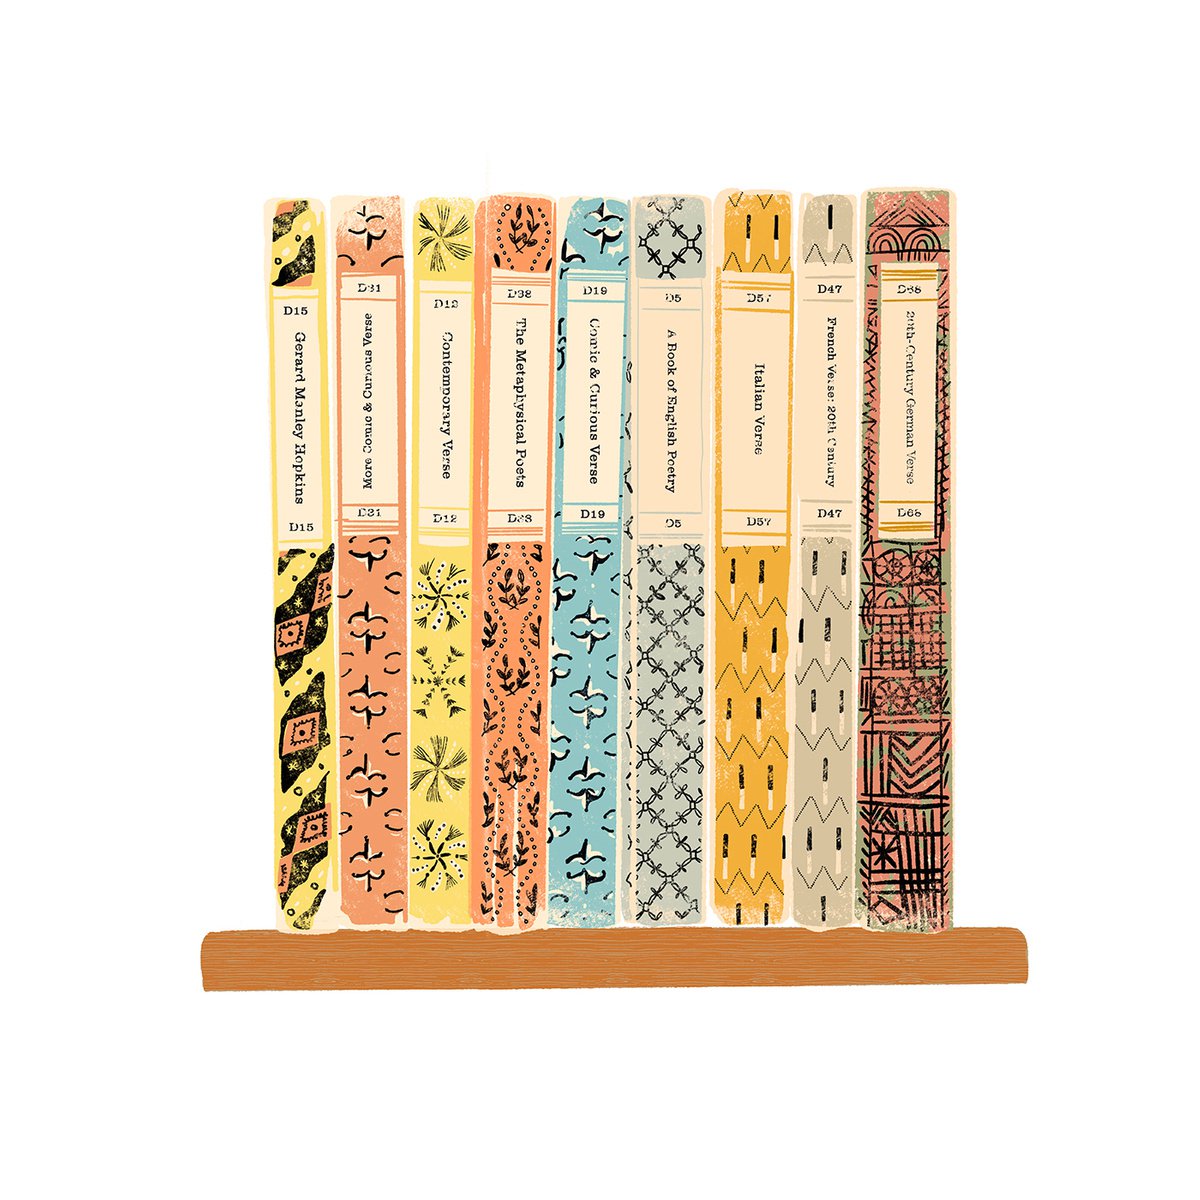 Penguin Poetry book collection, limited-edition by Design Smith